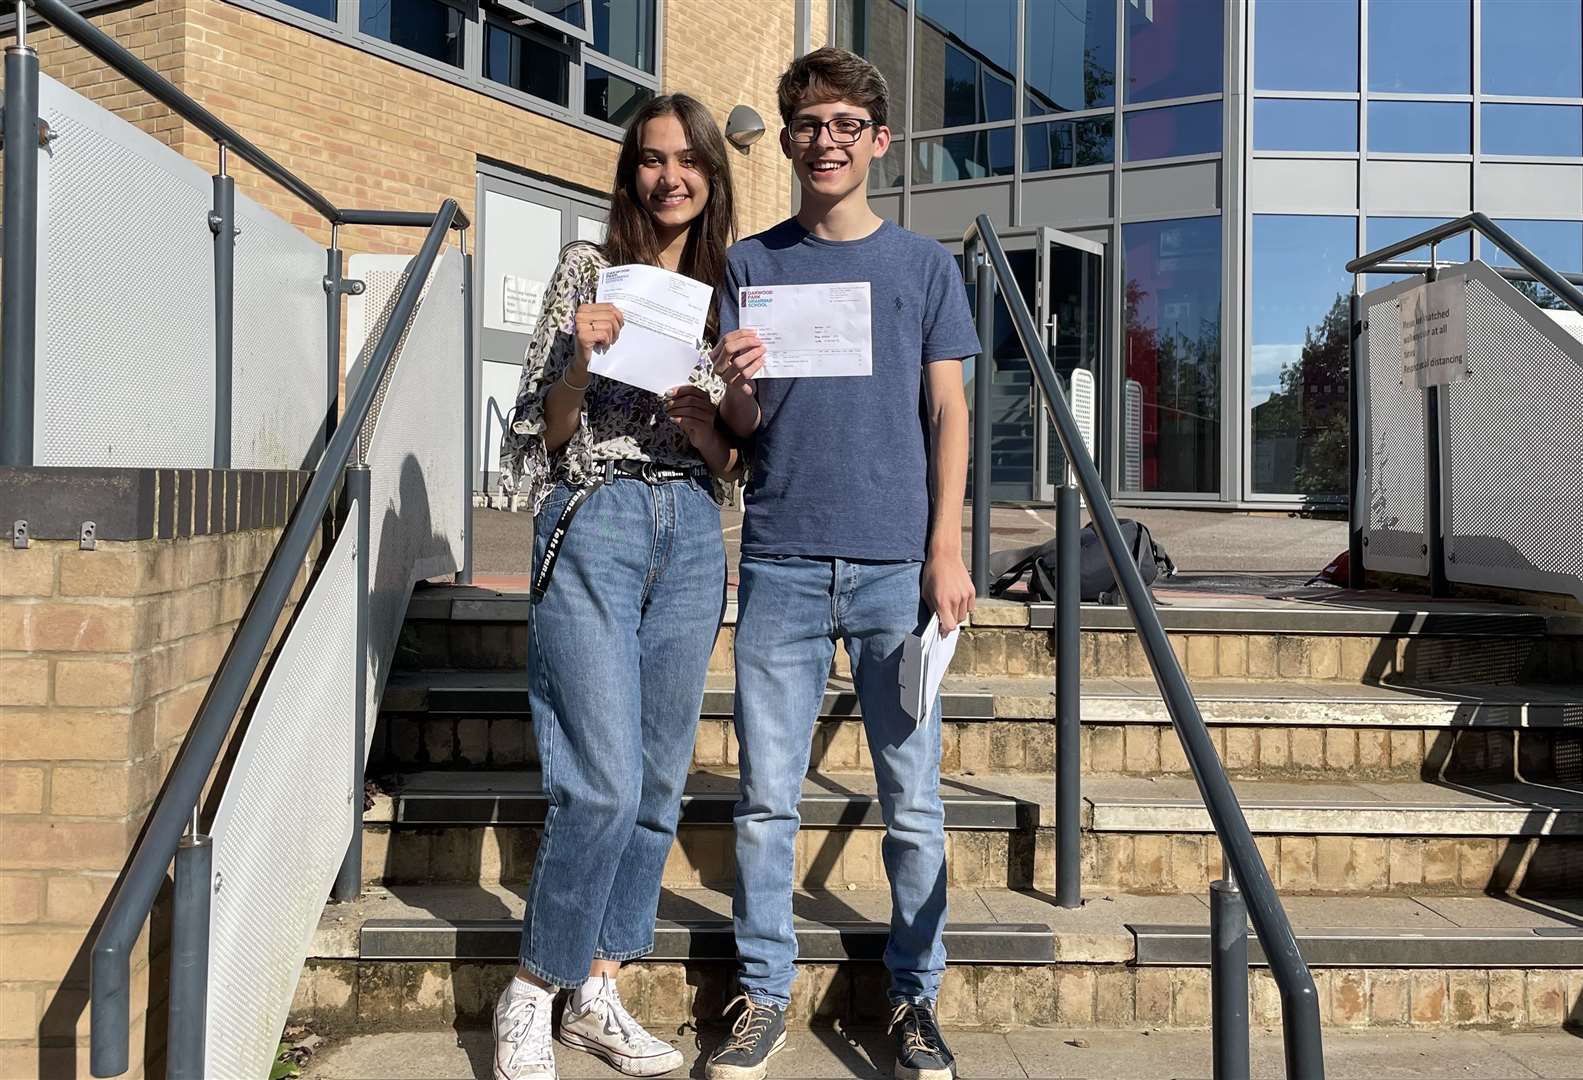 Oakwood Park Grammar School students Kajal Knight, who is head girl and achieved four A*s, with Ryan Mehaffey, who achieved three A*s